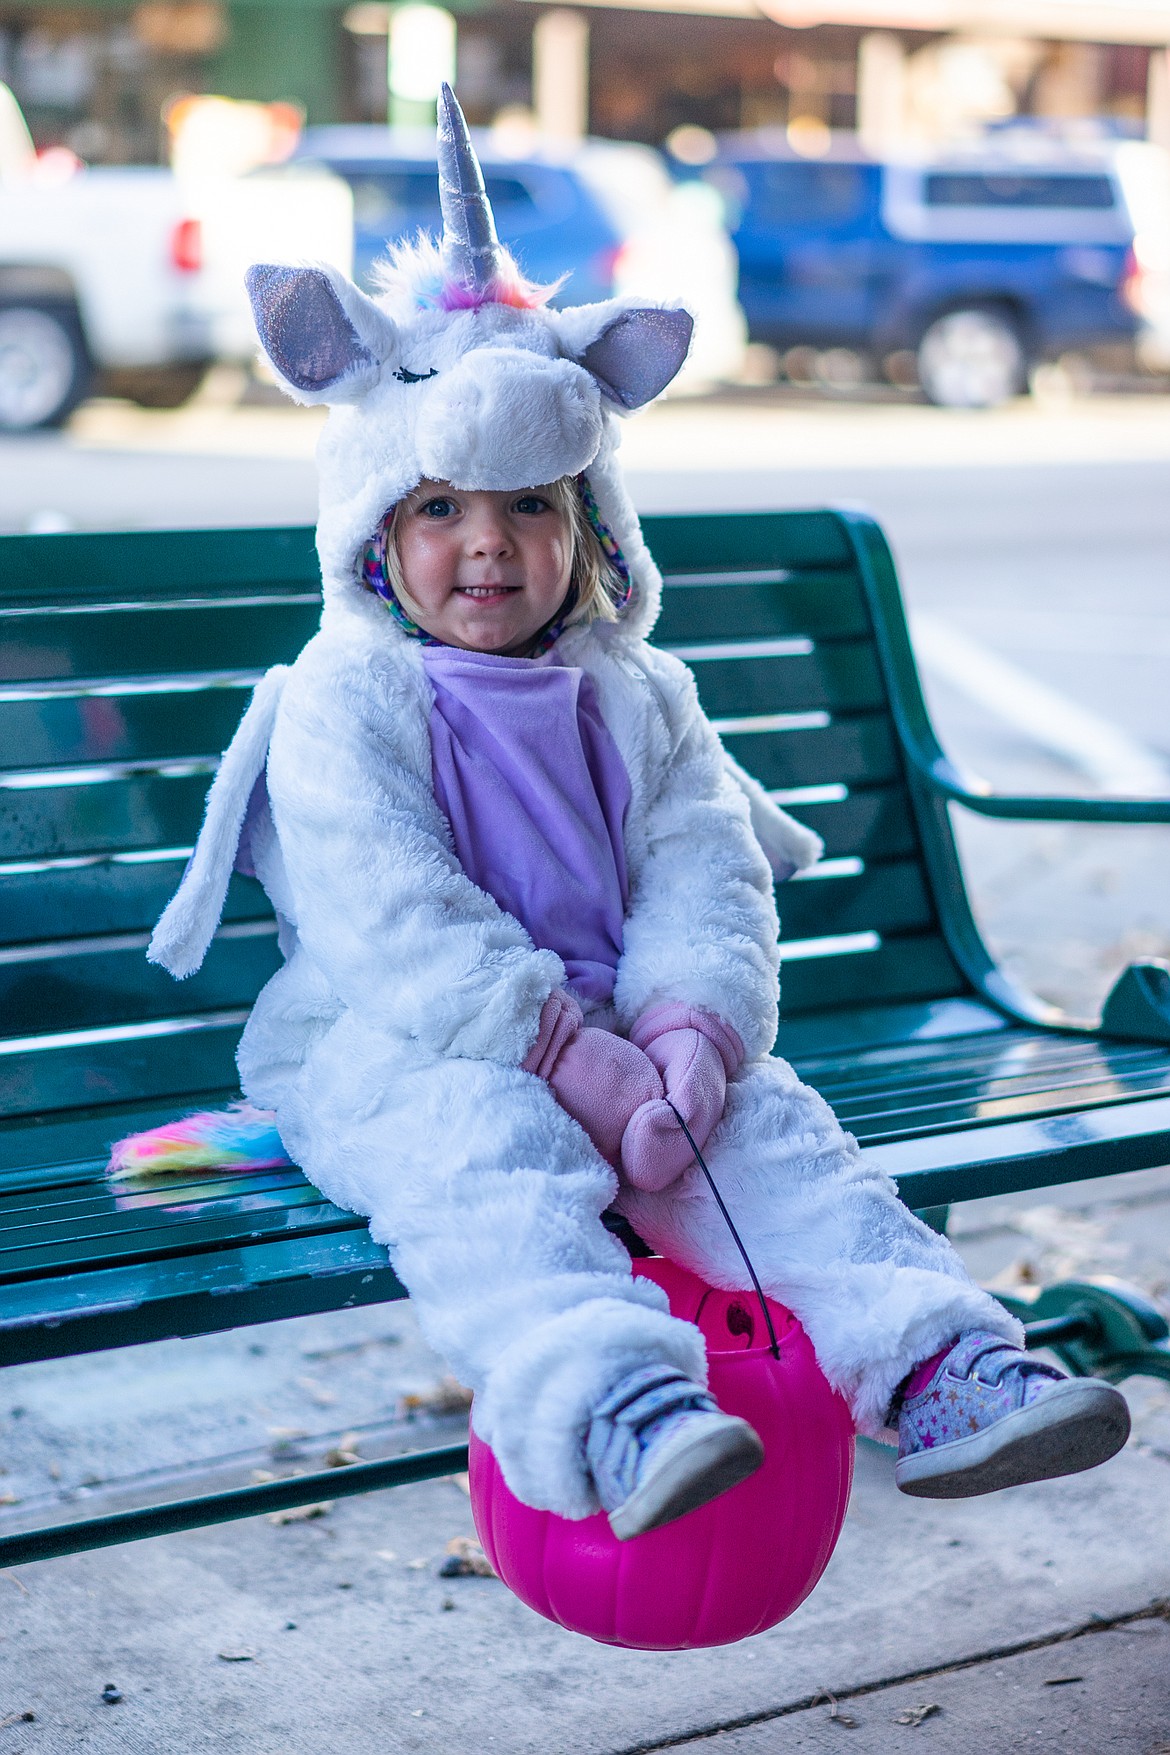 A unicorn smiles for the camera during the Whitefish Trick or Treat downtown on Thursday. (Daniel McKay/Whitefish Pilot)